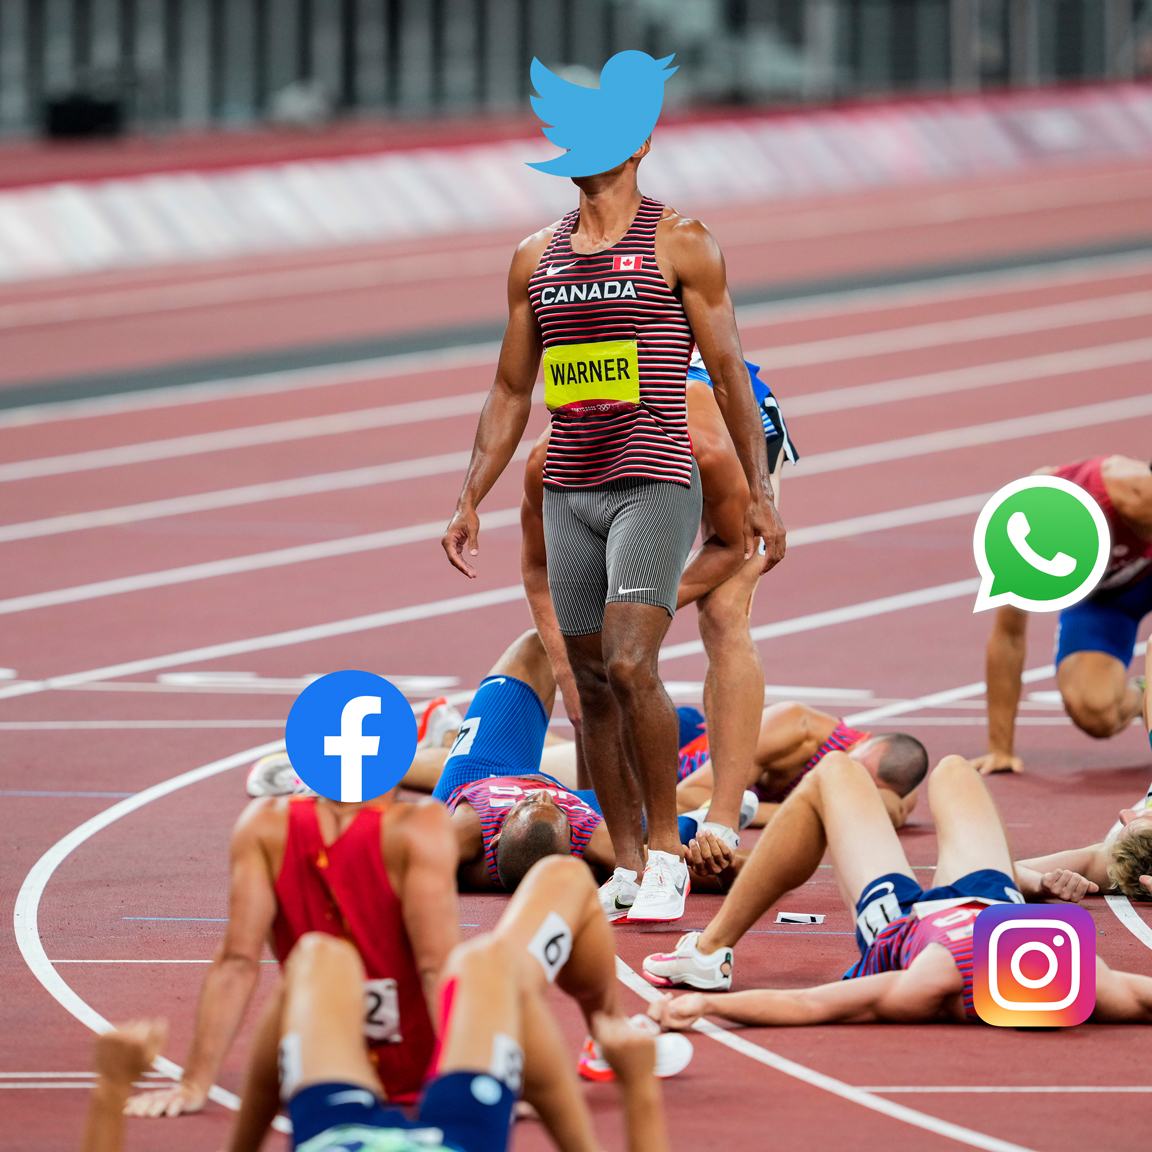 Twitter is the last man standing today. 🥇